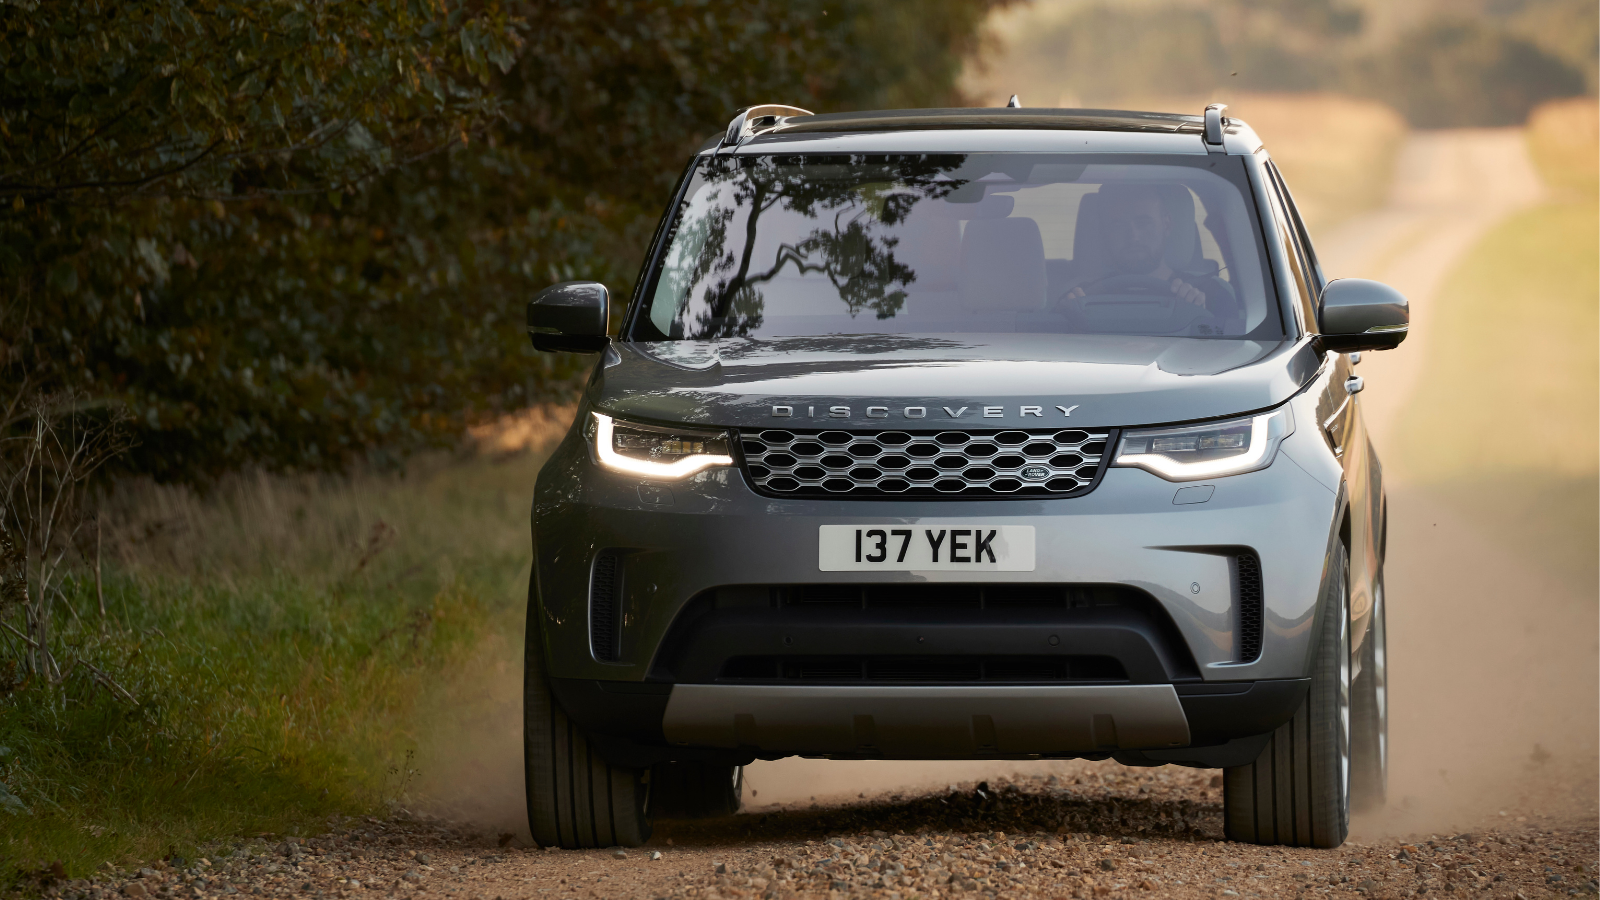 The all-new Land Rover Discovery: The Versatile SUV